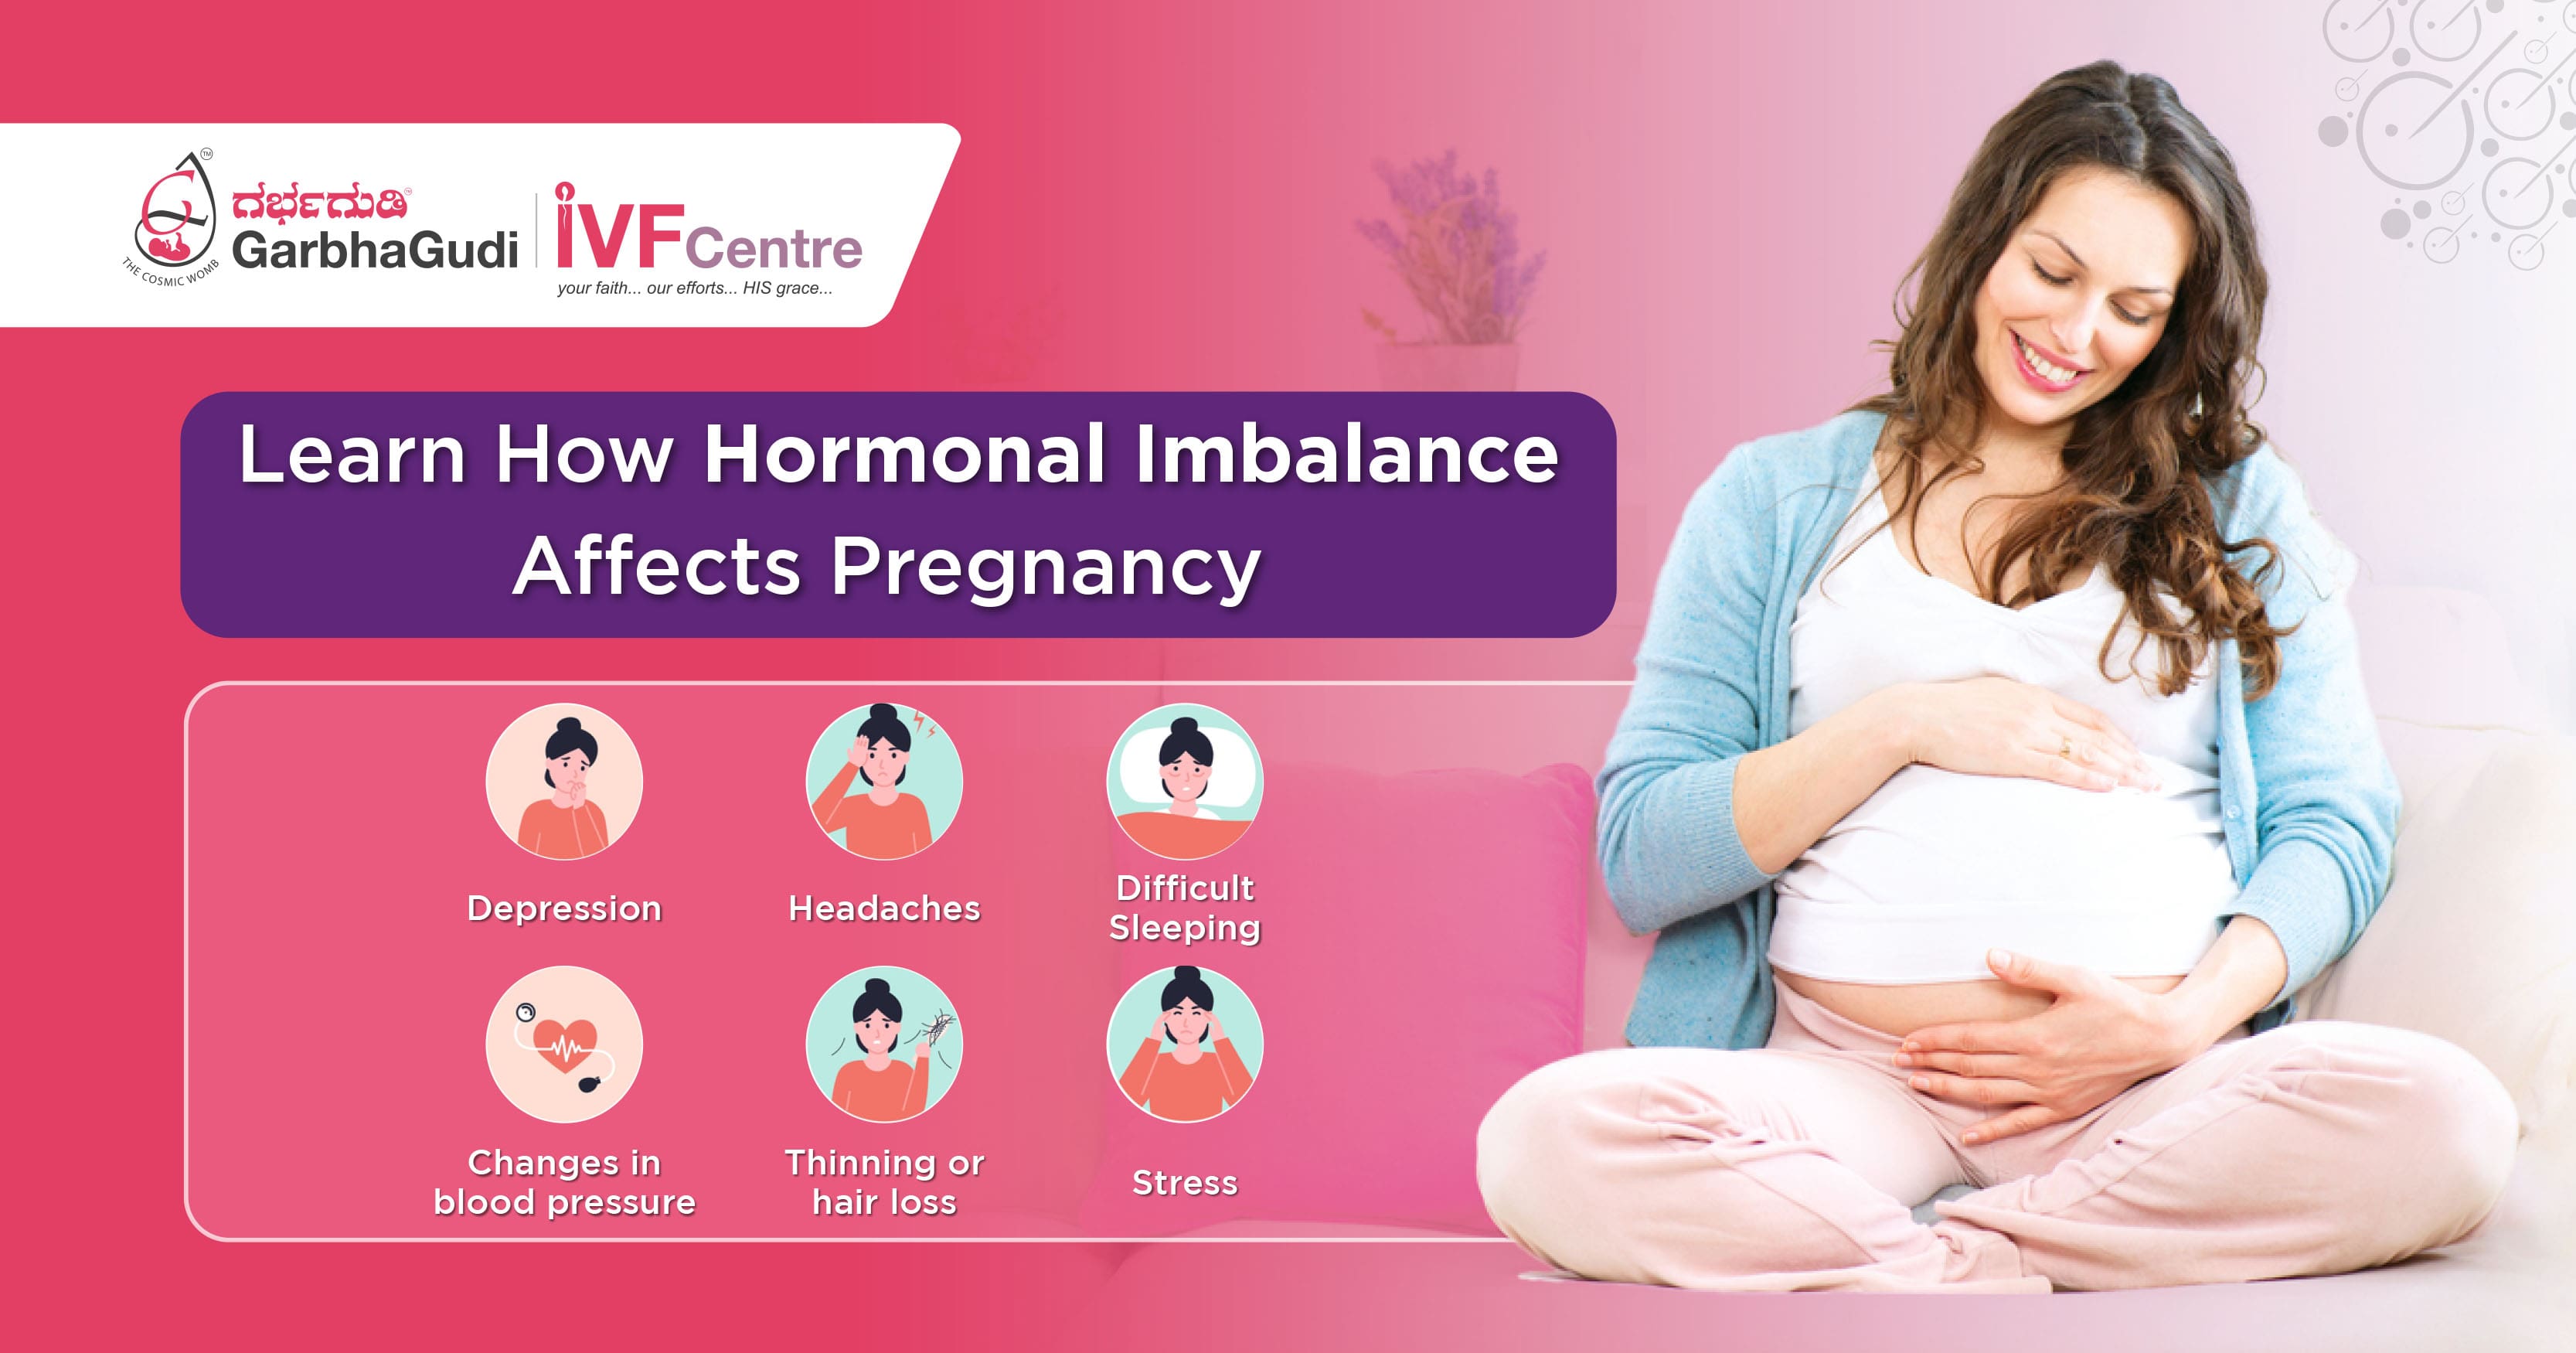 Learn How Hormonal Imbalance Affects Pregnancy